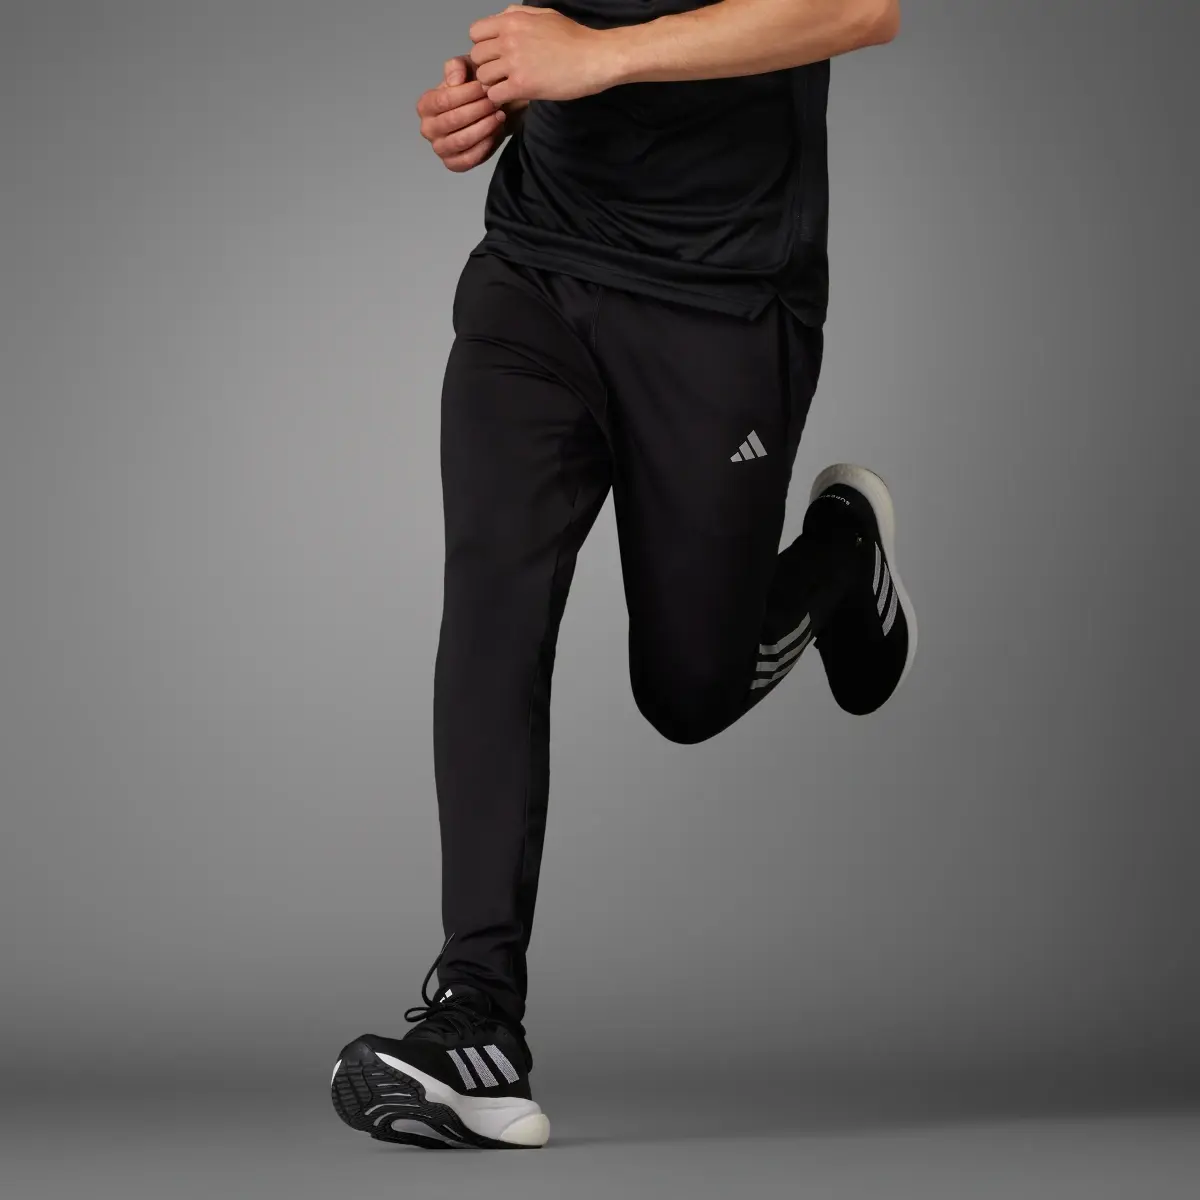 Adidas Own the Run Astro Knit Joggers. 1